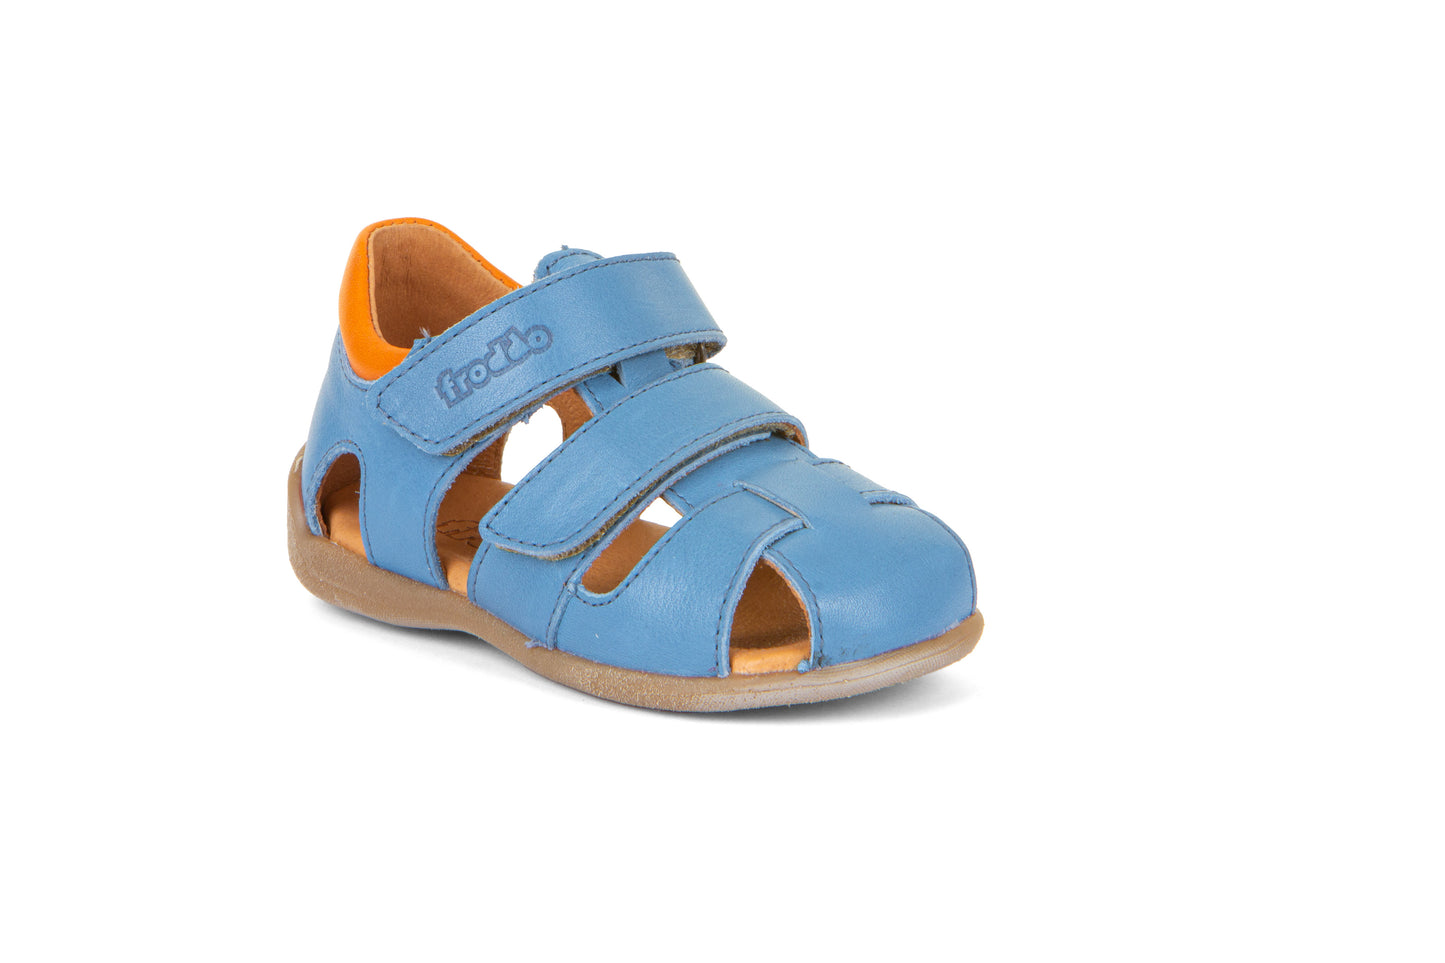 A boys leather sandal by Froddo, style Carte Double, in blue multi leather with velcro fastening. Angle view 2.